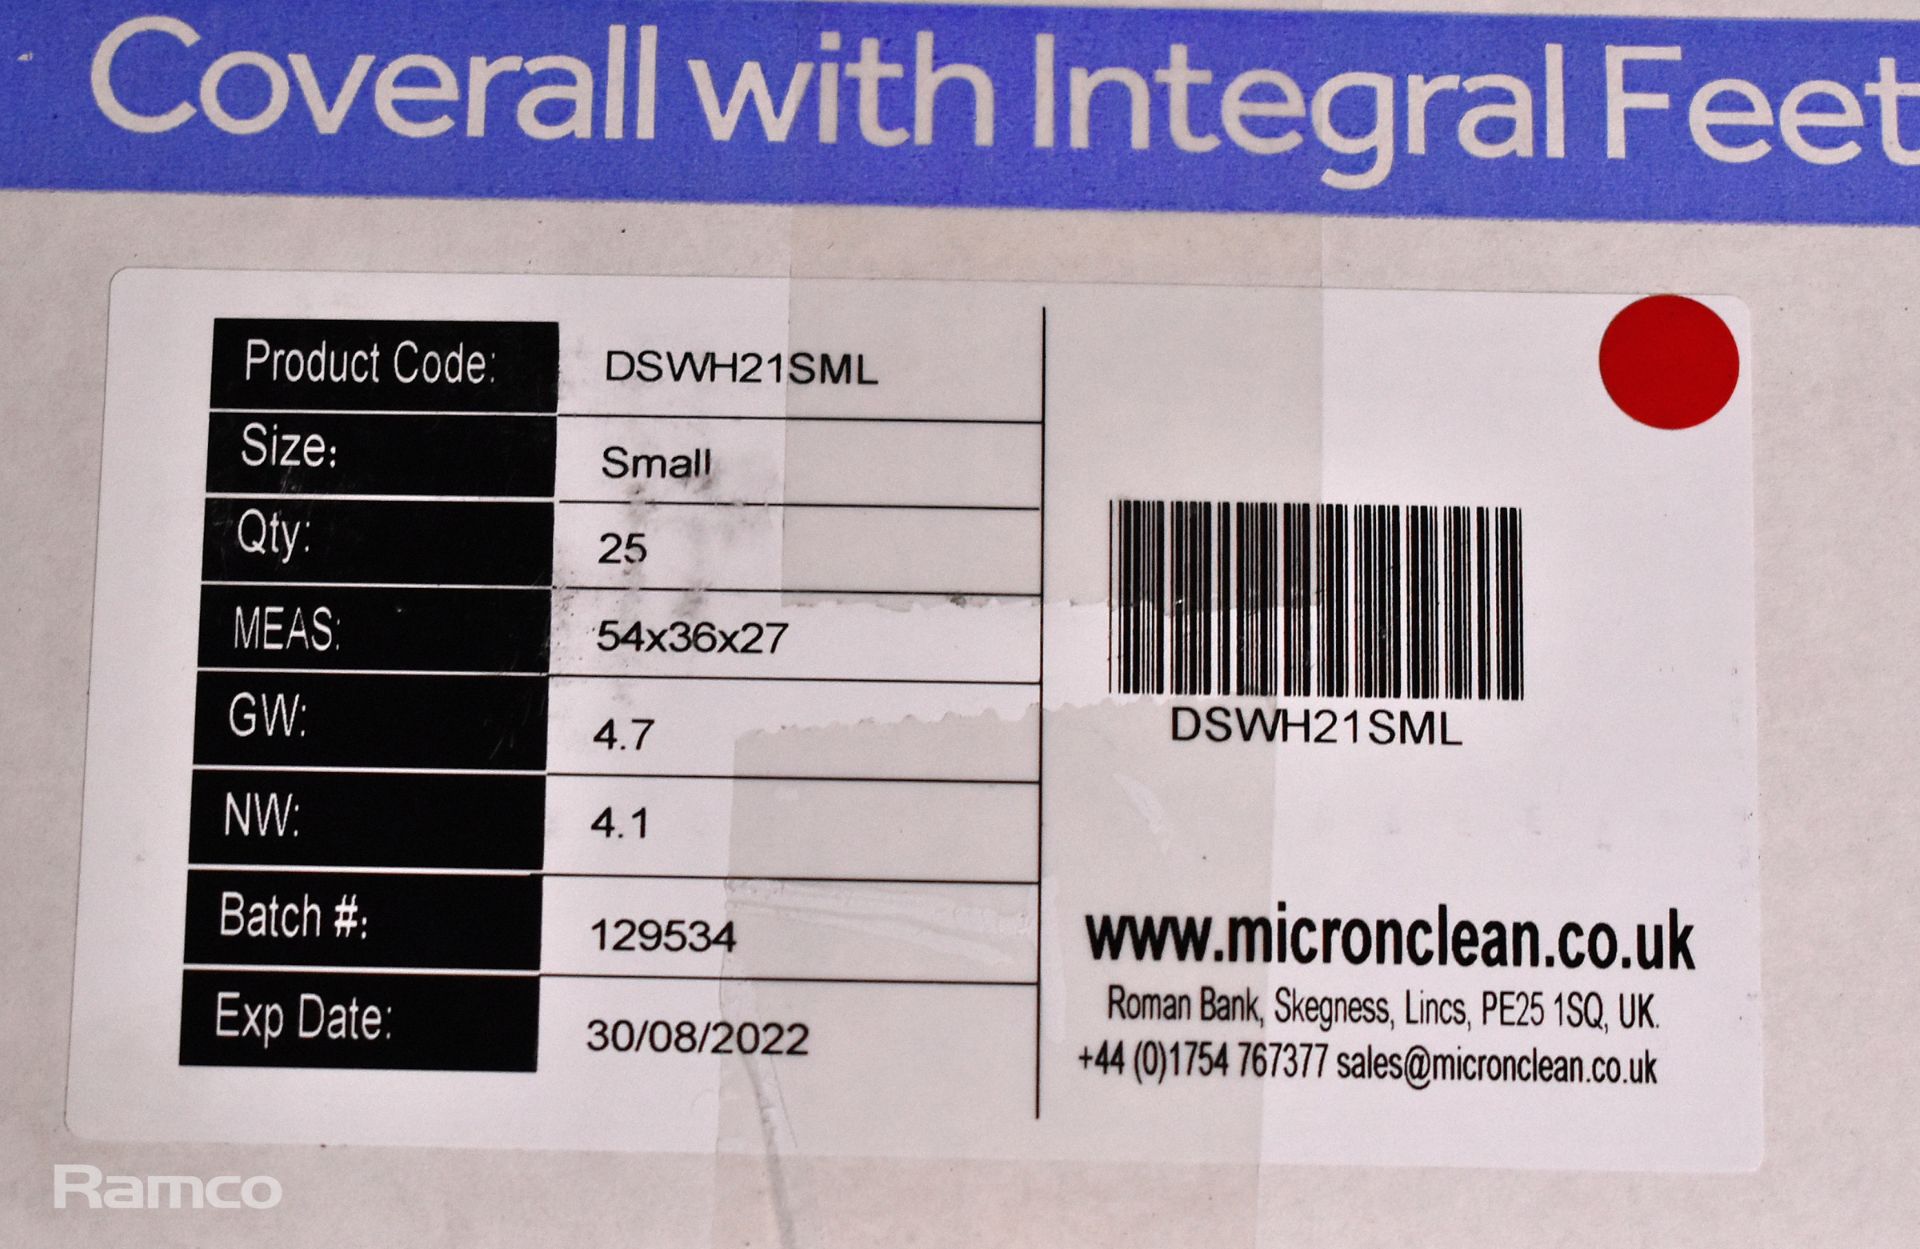 MicroClean SureGuard 3 - size small coverall with integral feet - 25 units per box - Image 4 of 4